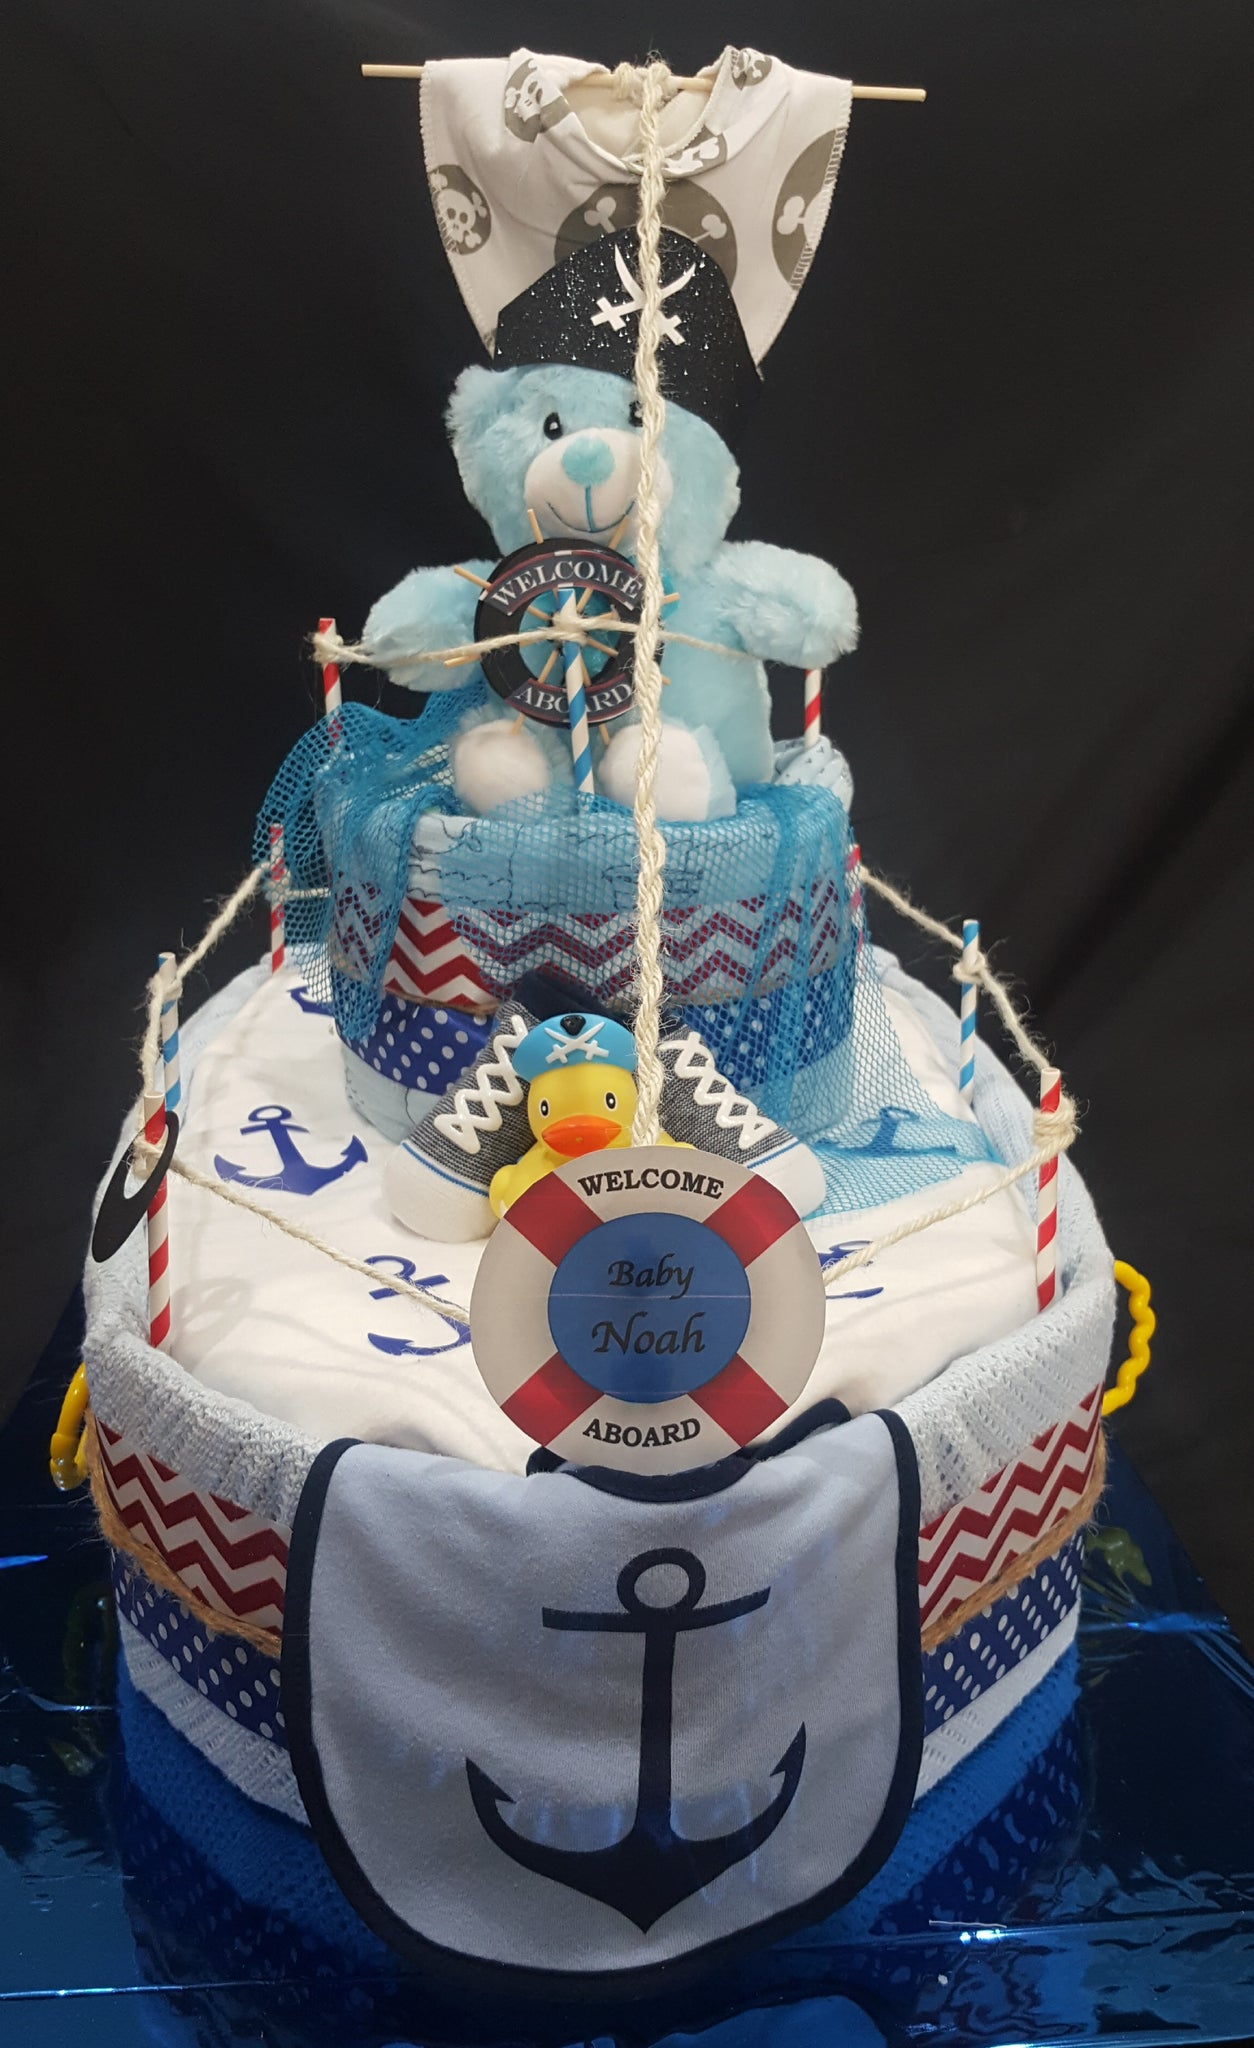 Pirate Ship Cake with Kraken - Decorated Cake by Heather - CakesDecor